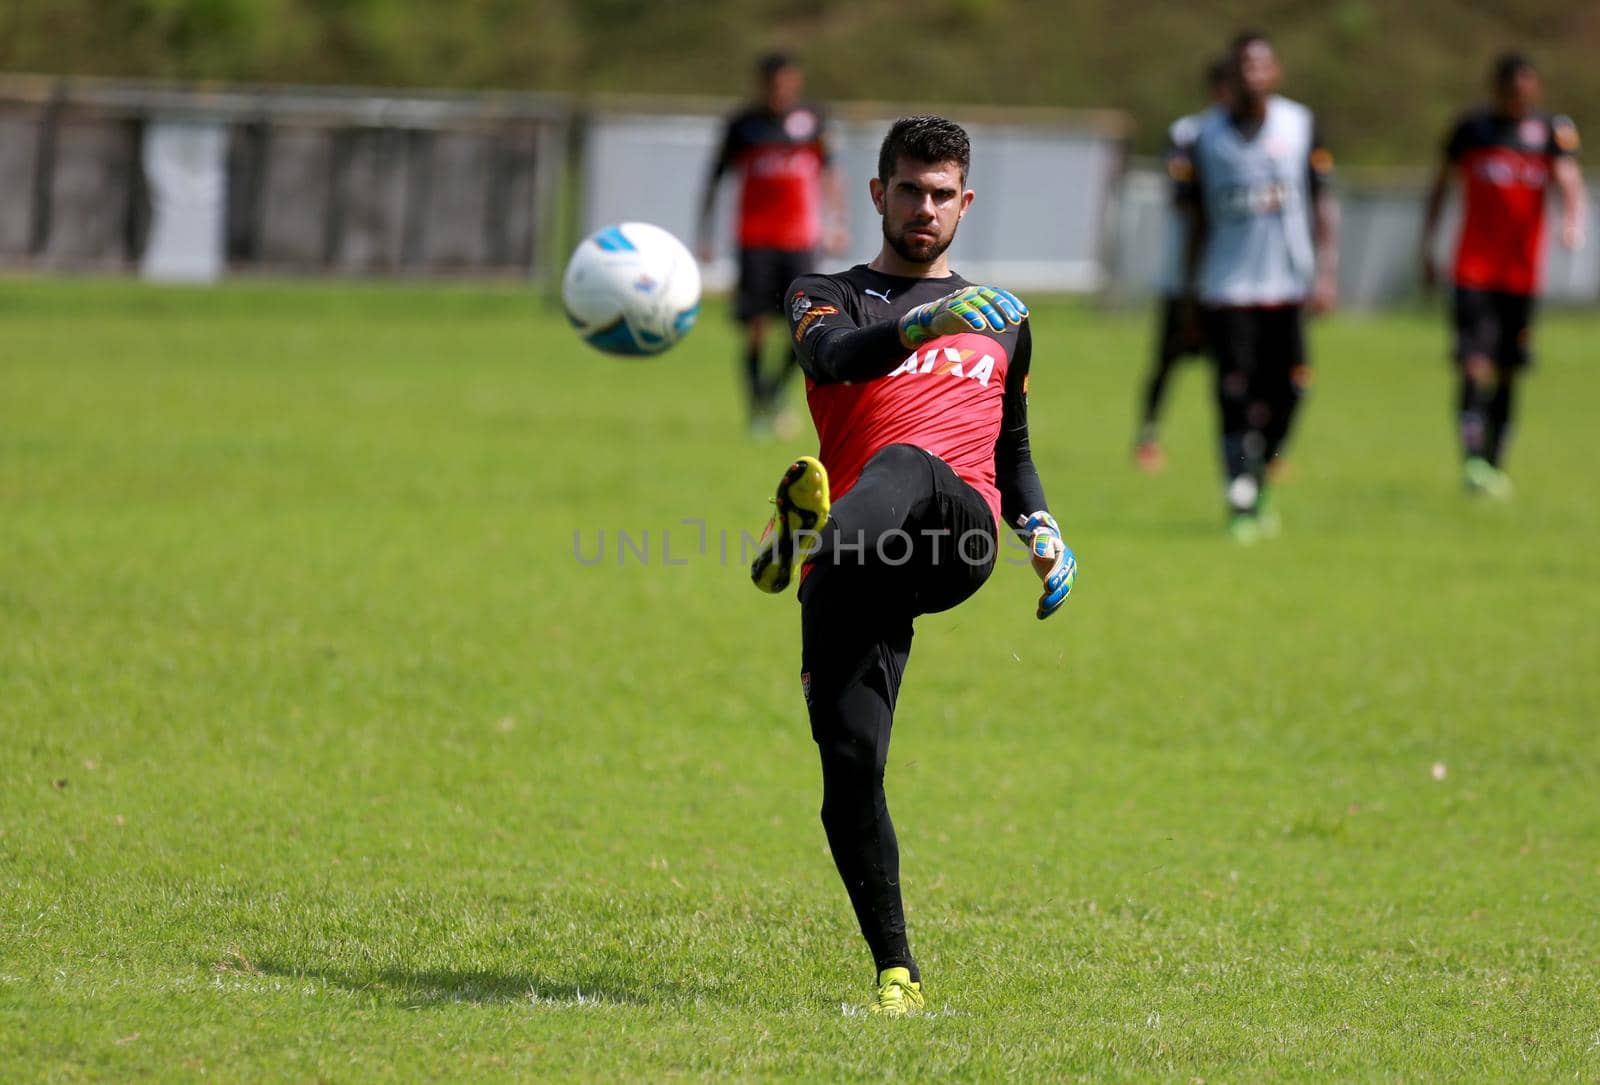 salvador, bahia / brazil - may 5, 2015: Fernando Miguel Kaufmann, goalkeeper of Esporte Clube Vitoria is seen during team training in the city of Salvador.